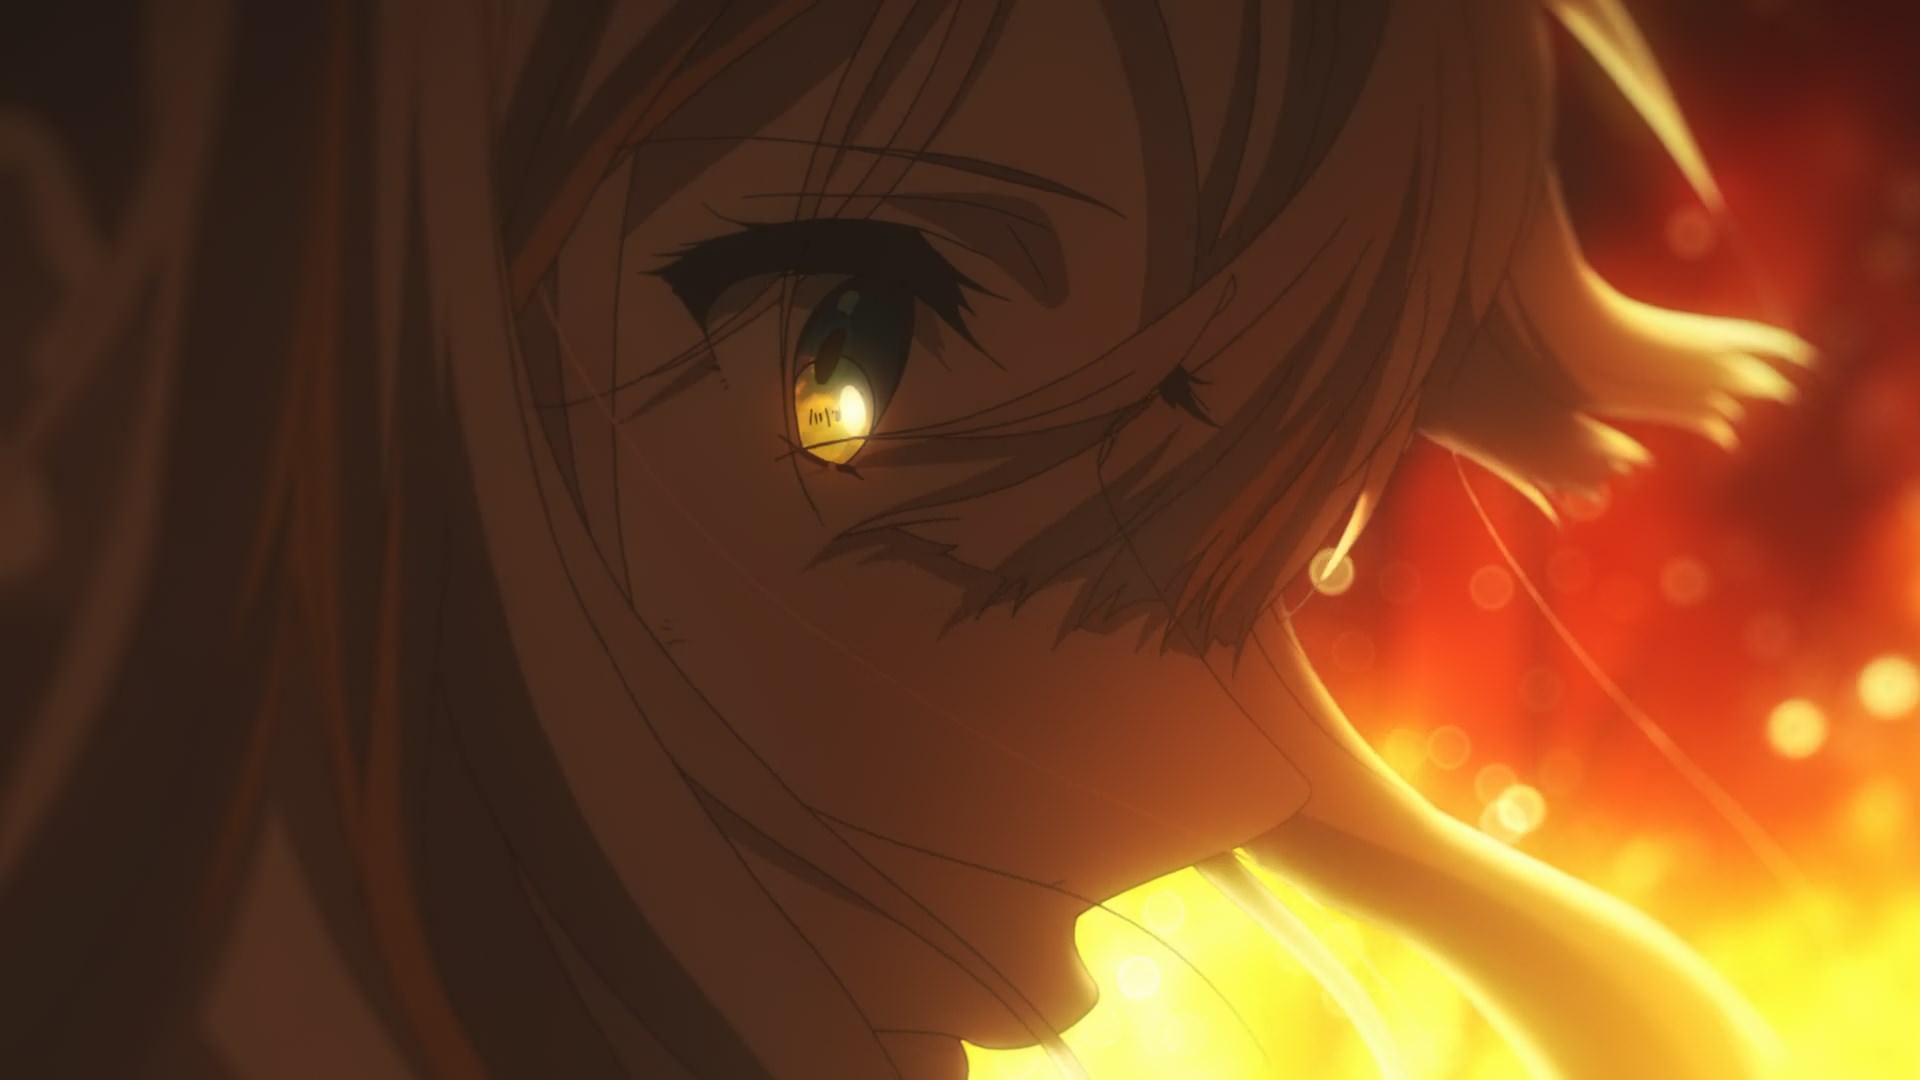 Violet Evergarden (2018): ratings and release dates for each episode